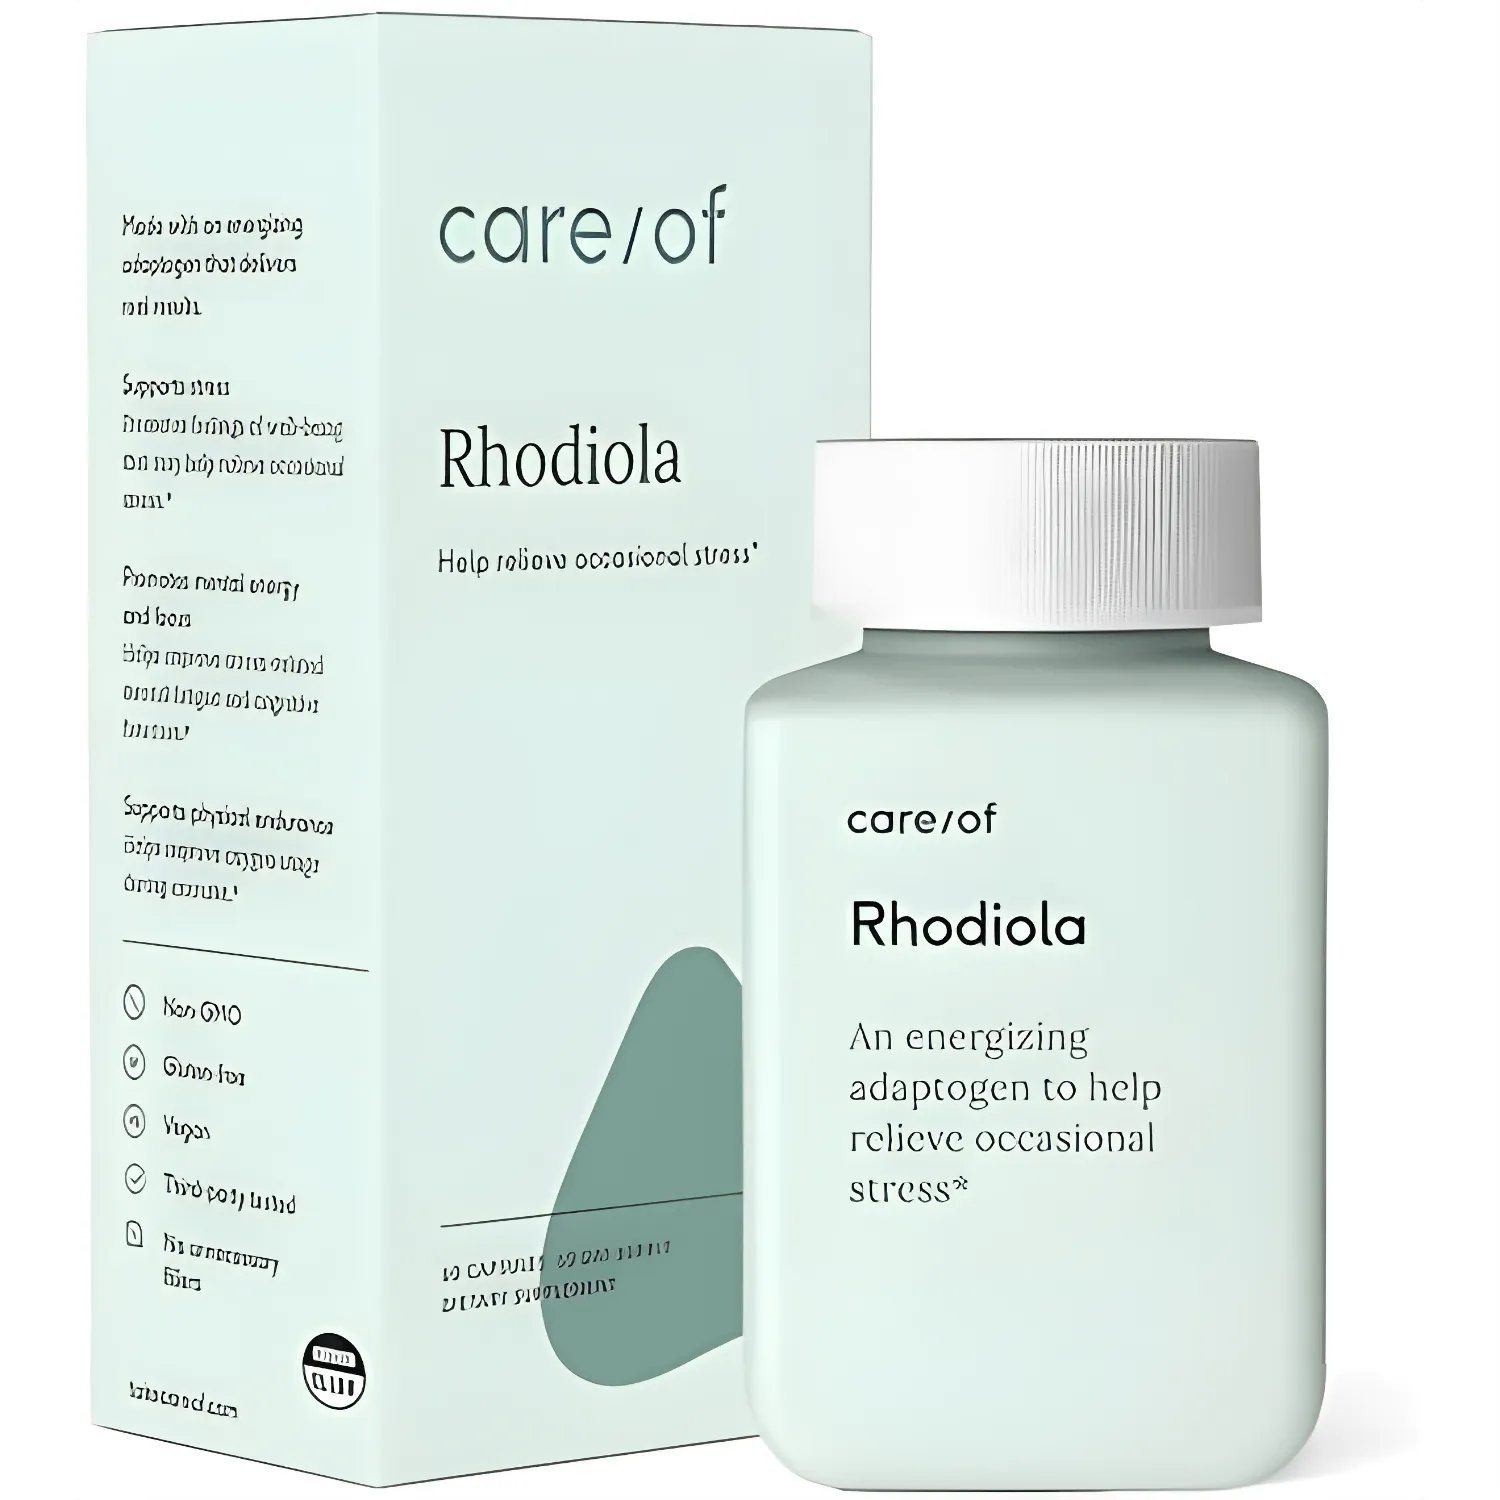 Free Care/Of Rhodiola Vitamin And Supplements